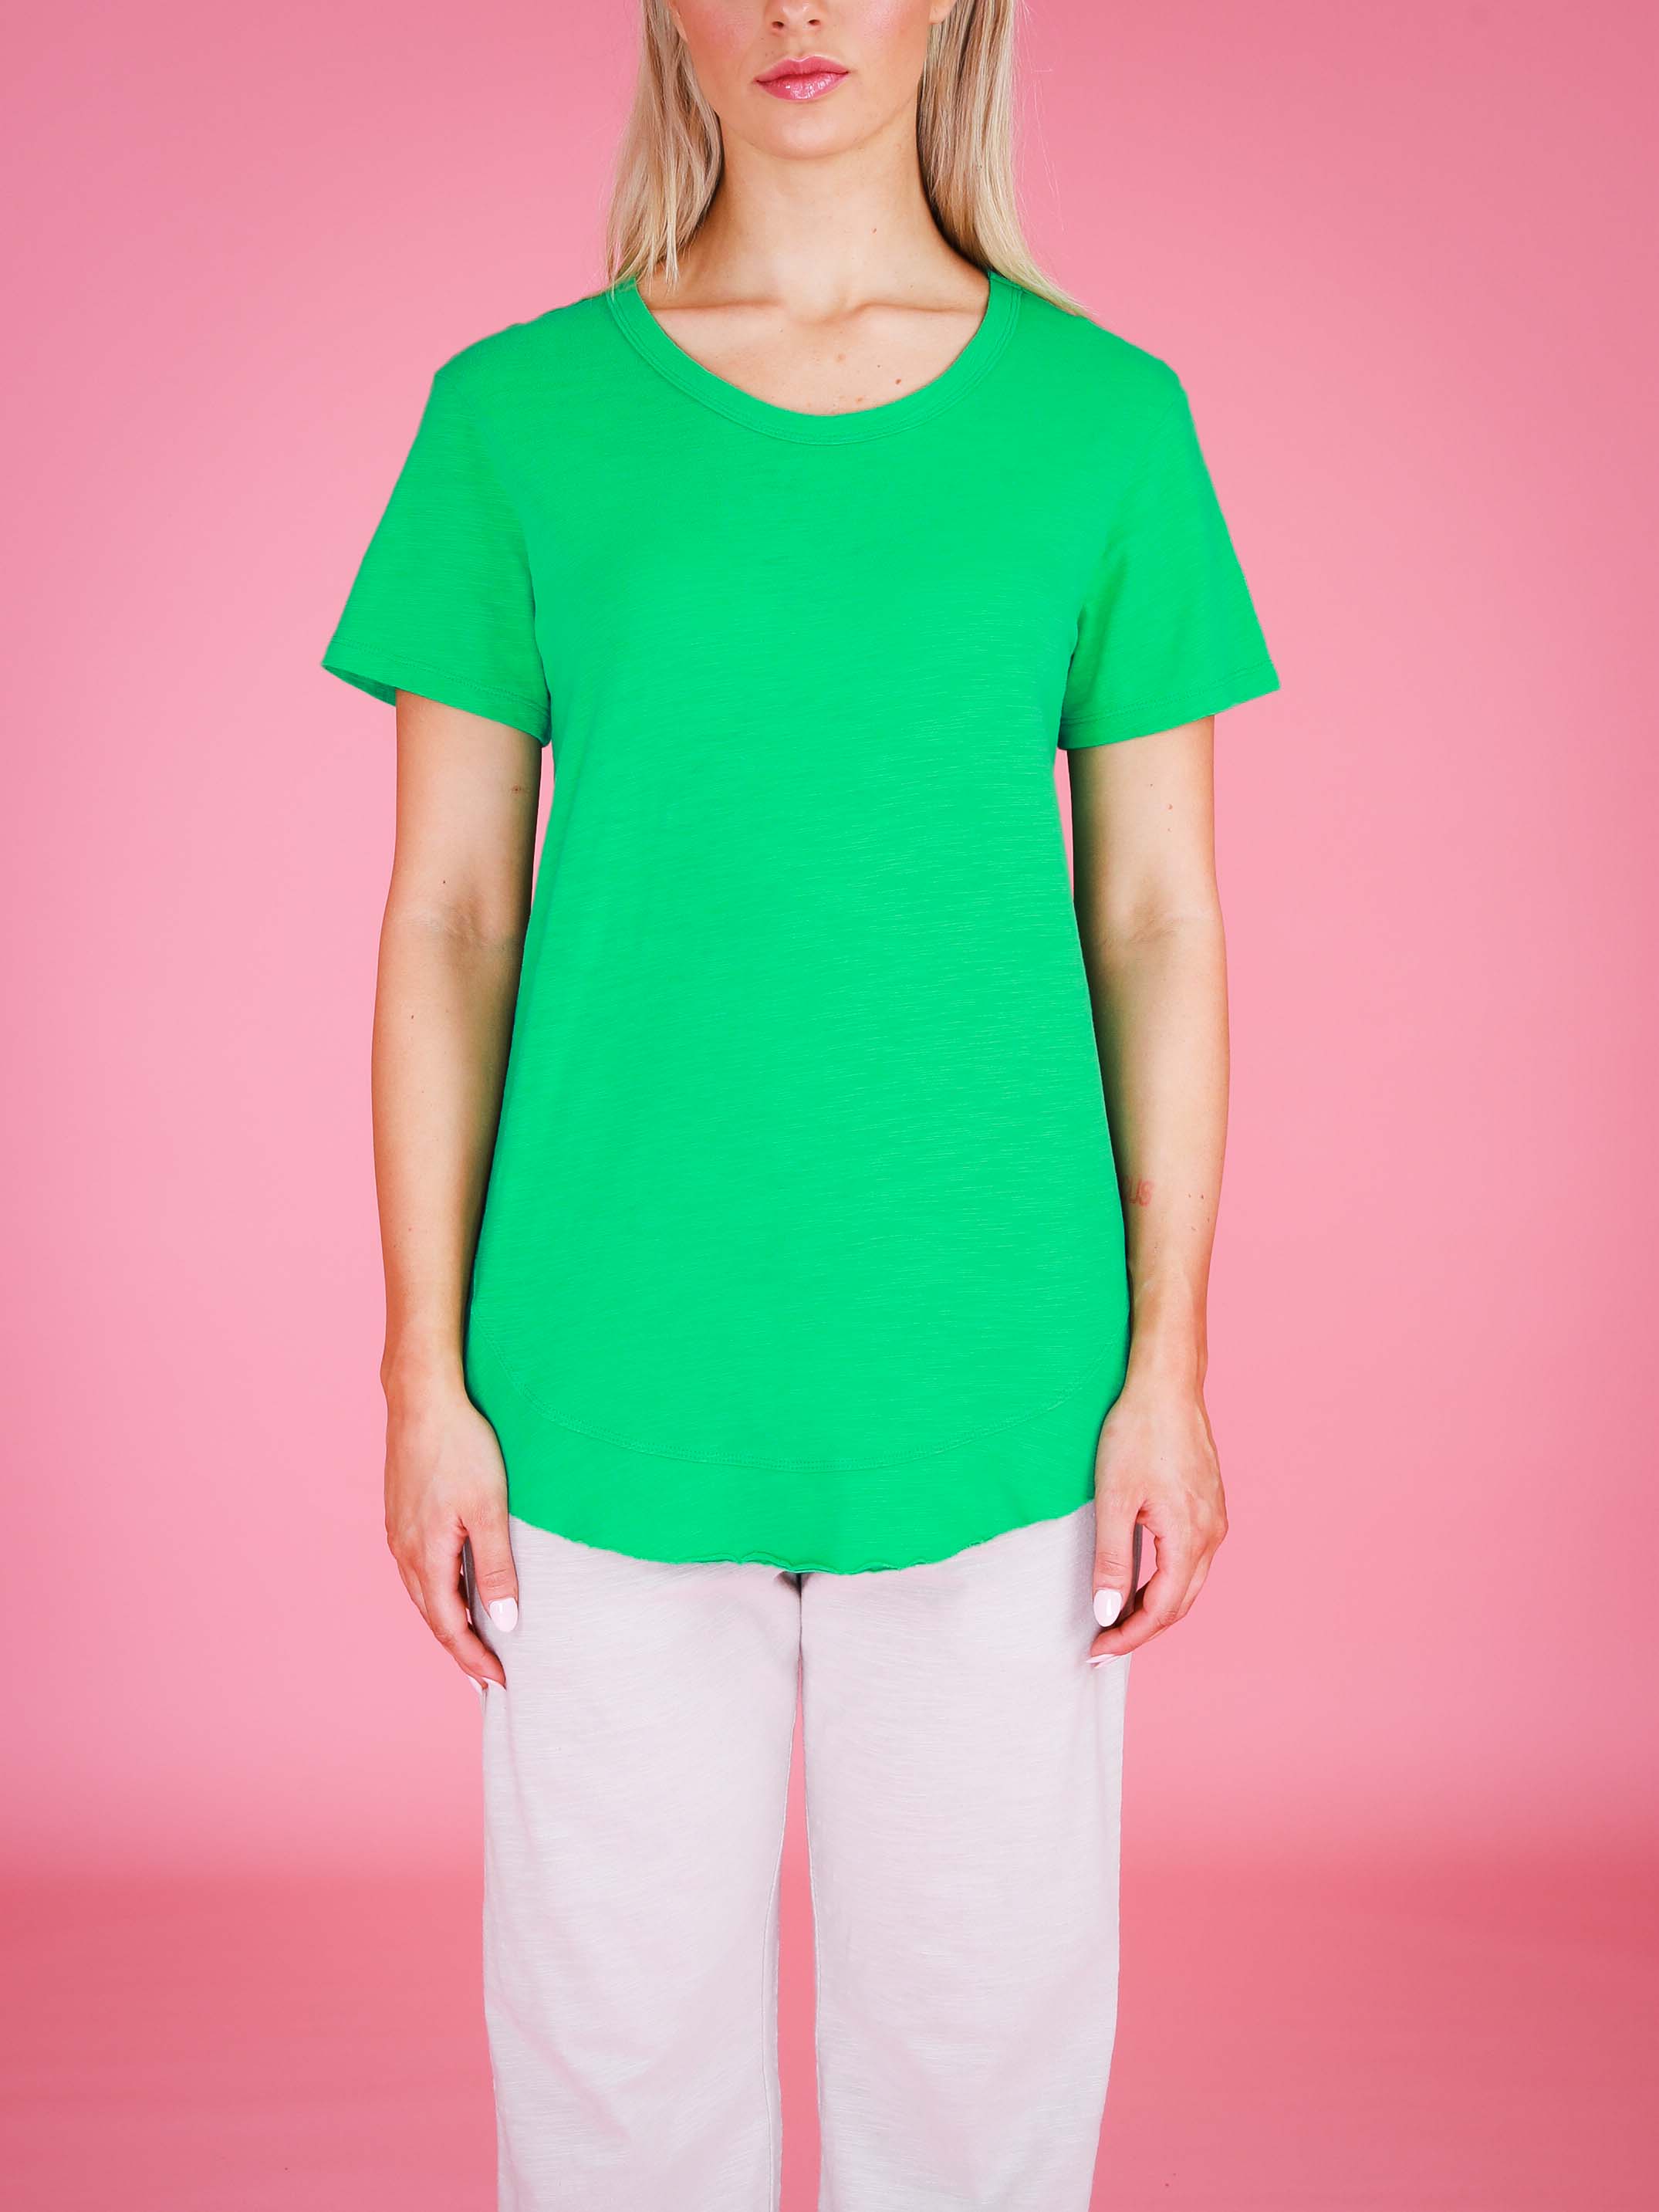 emerald green womens top #color_peppermint